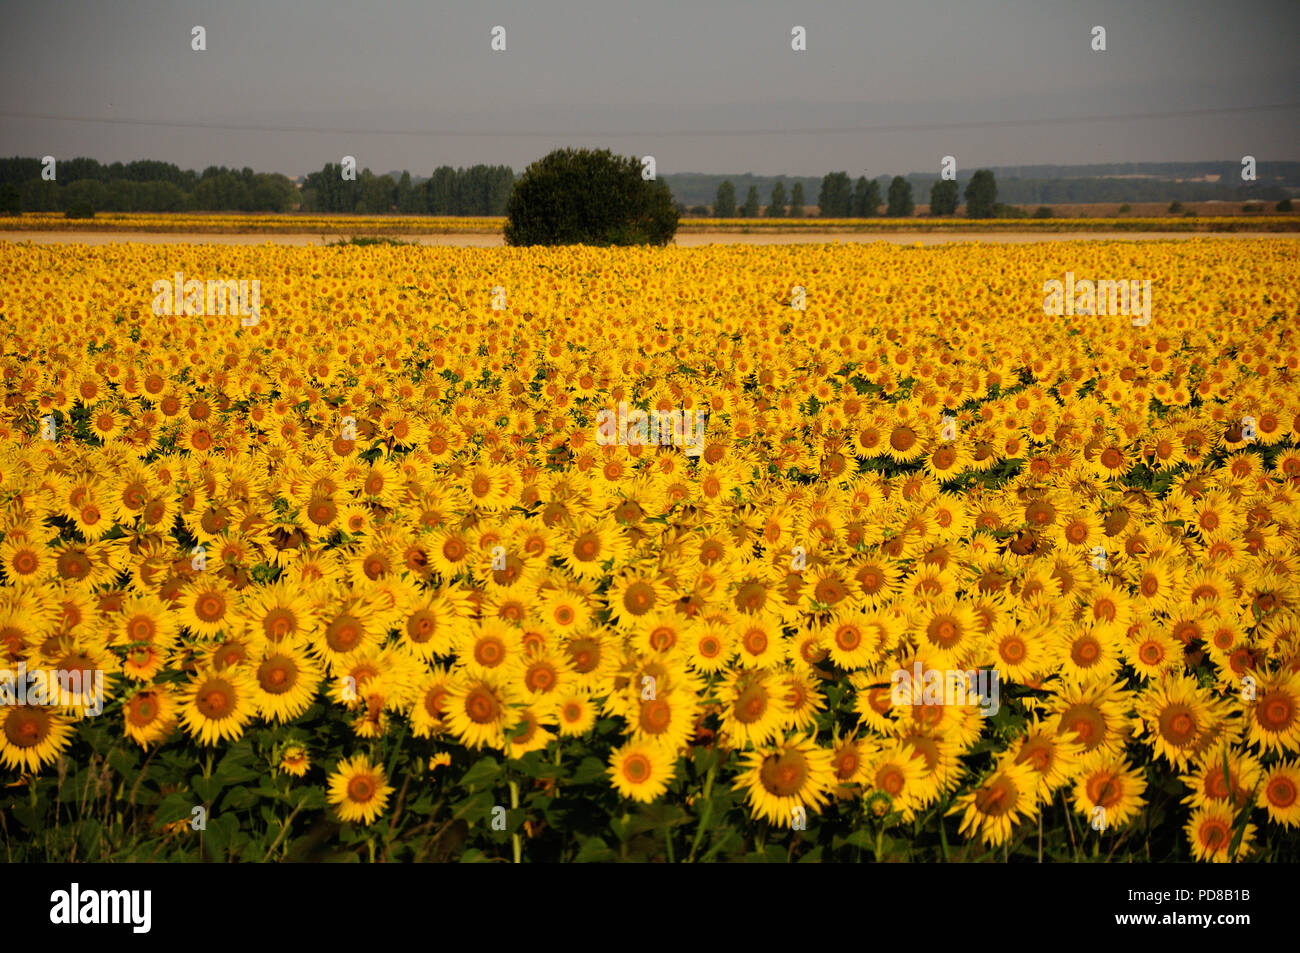 St. Nicholas, Lincolnshire, UK. 7th August 2018. Deeping St. Nicholas, . A field of Sunflowers grown for bird food by farmer and conservationist Nicholas Watts in the Fens at Vine Farm in Deeping St. Nicholas in Lincolnshire. Jonathan Clarke/Alamy Live News Stock Photo